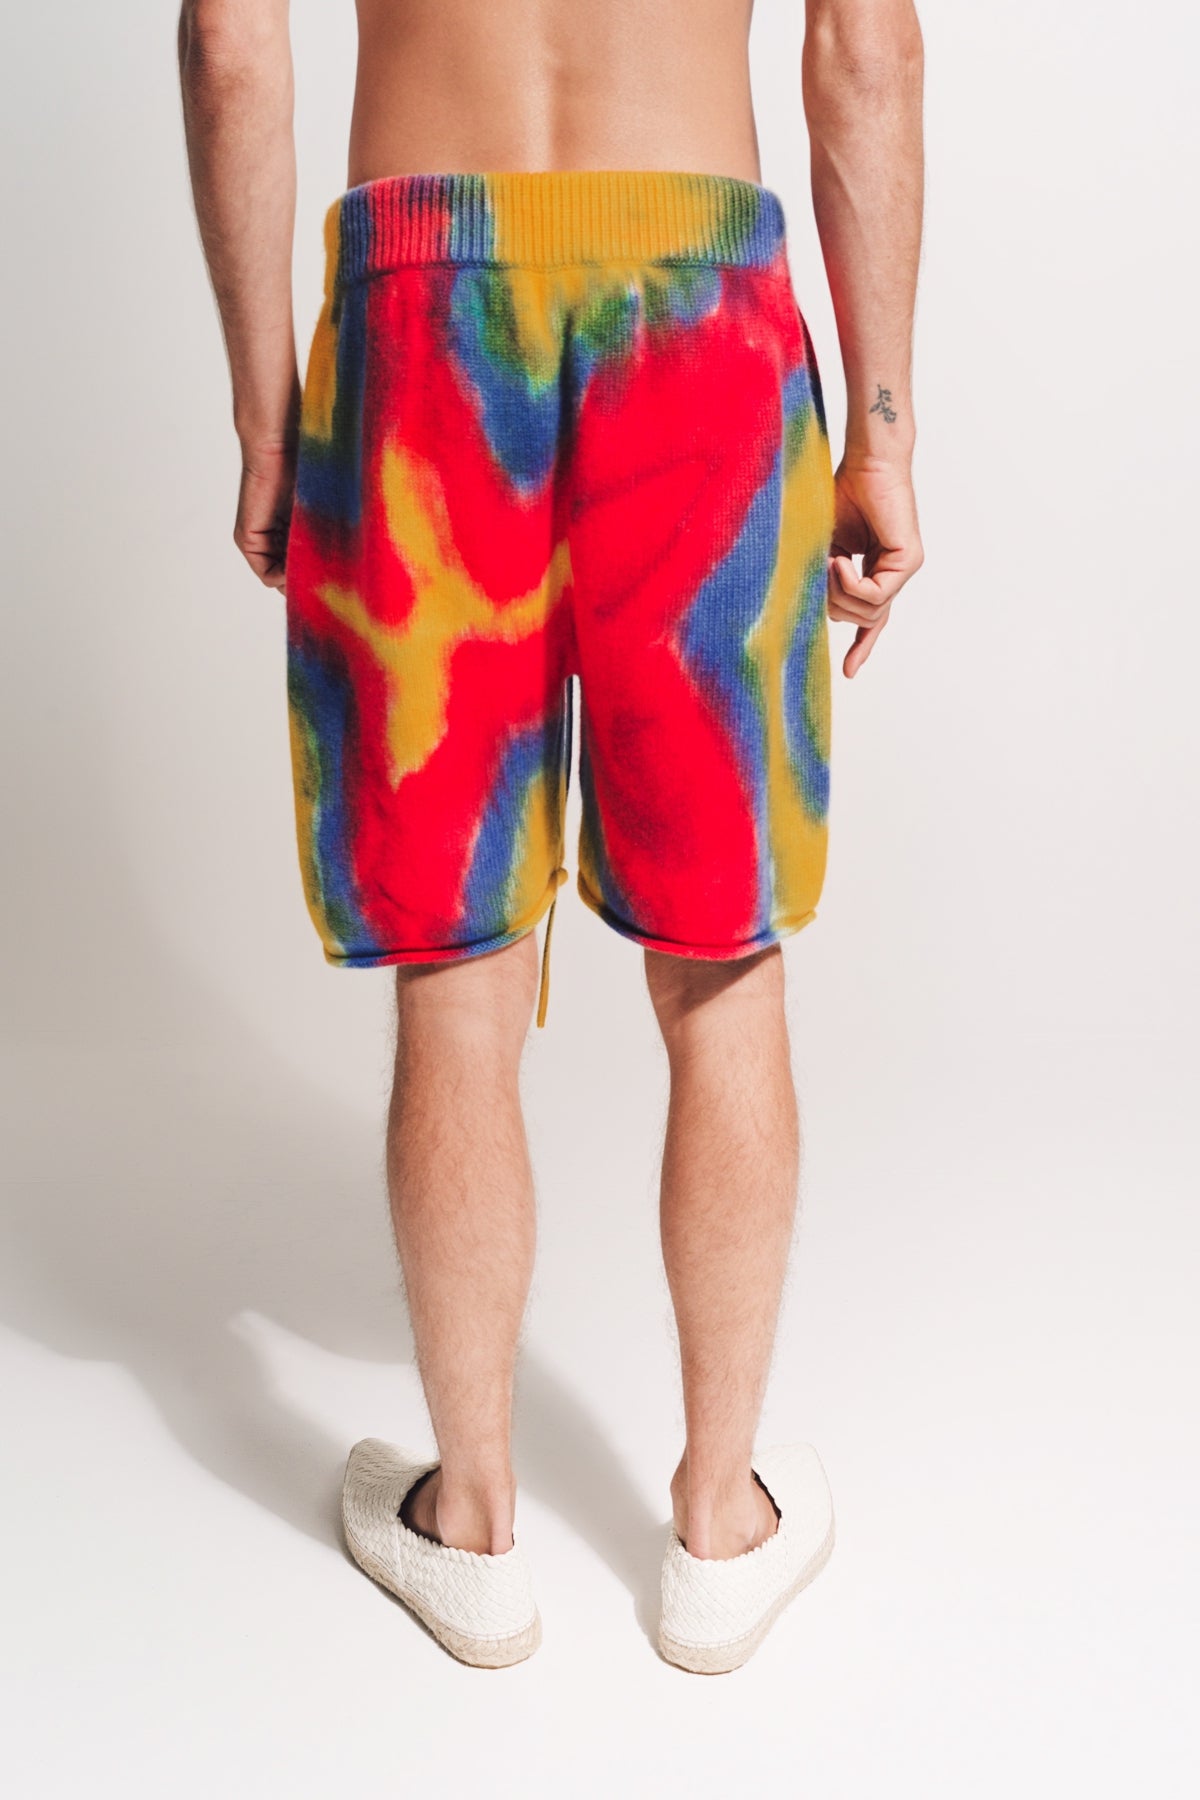 THE ELDER STATESMAN | PAINTED FLORAL SHORTS